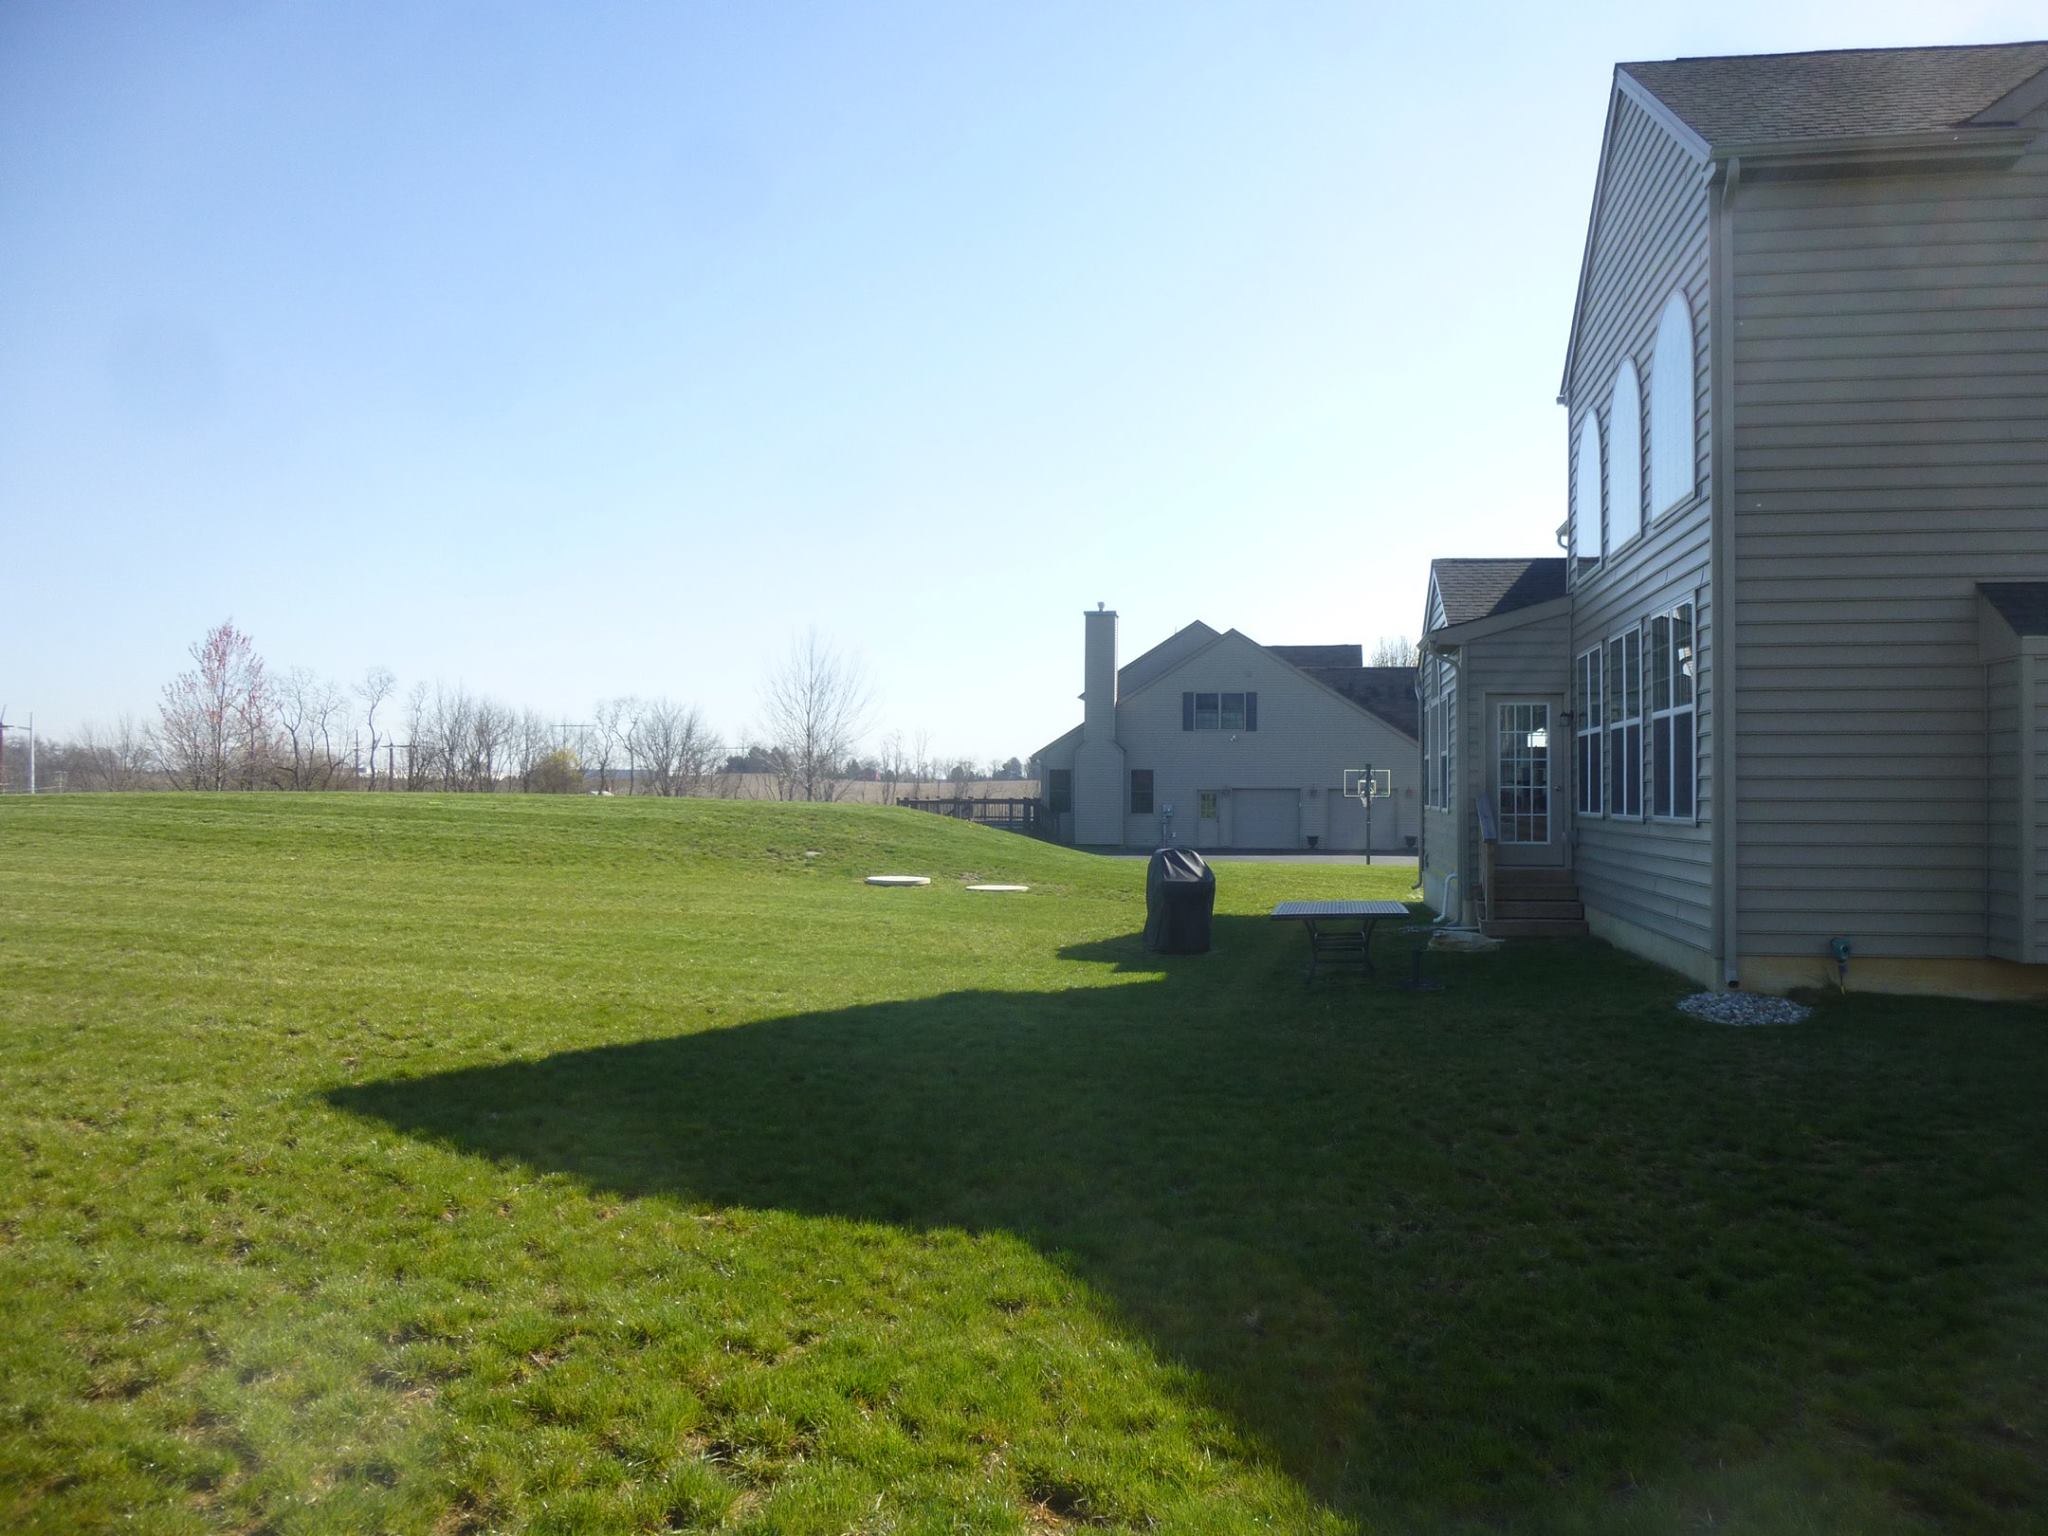 Side view of backyard with homes in background, lots of grass.